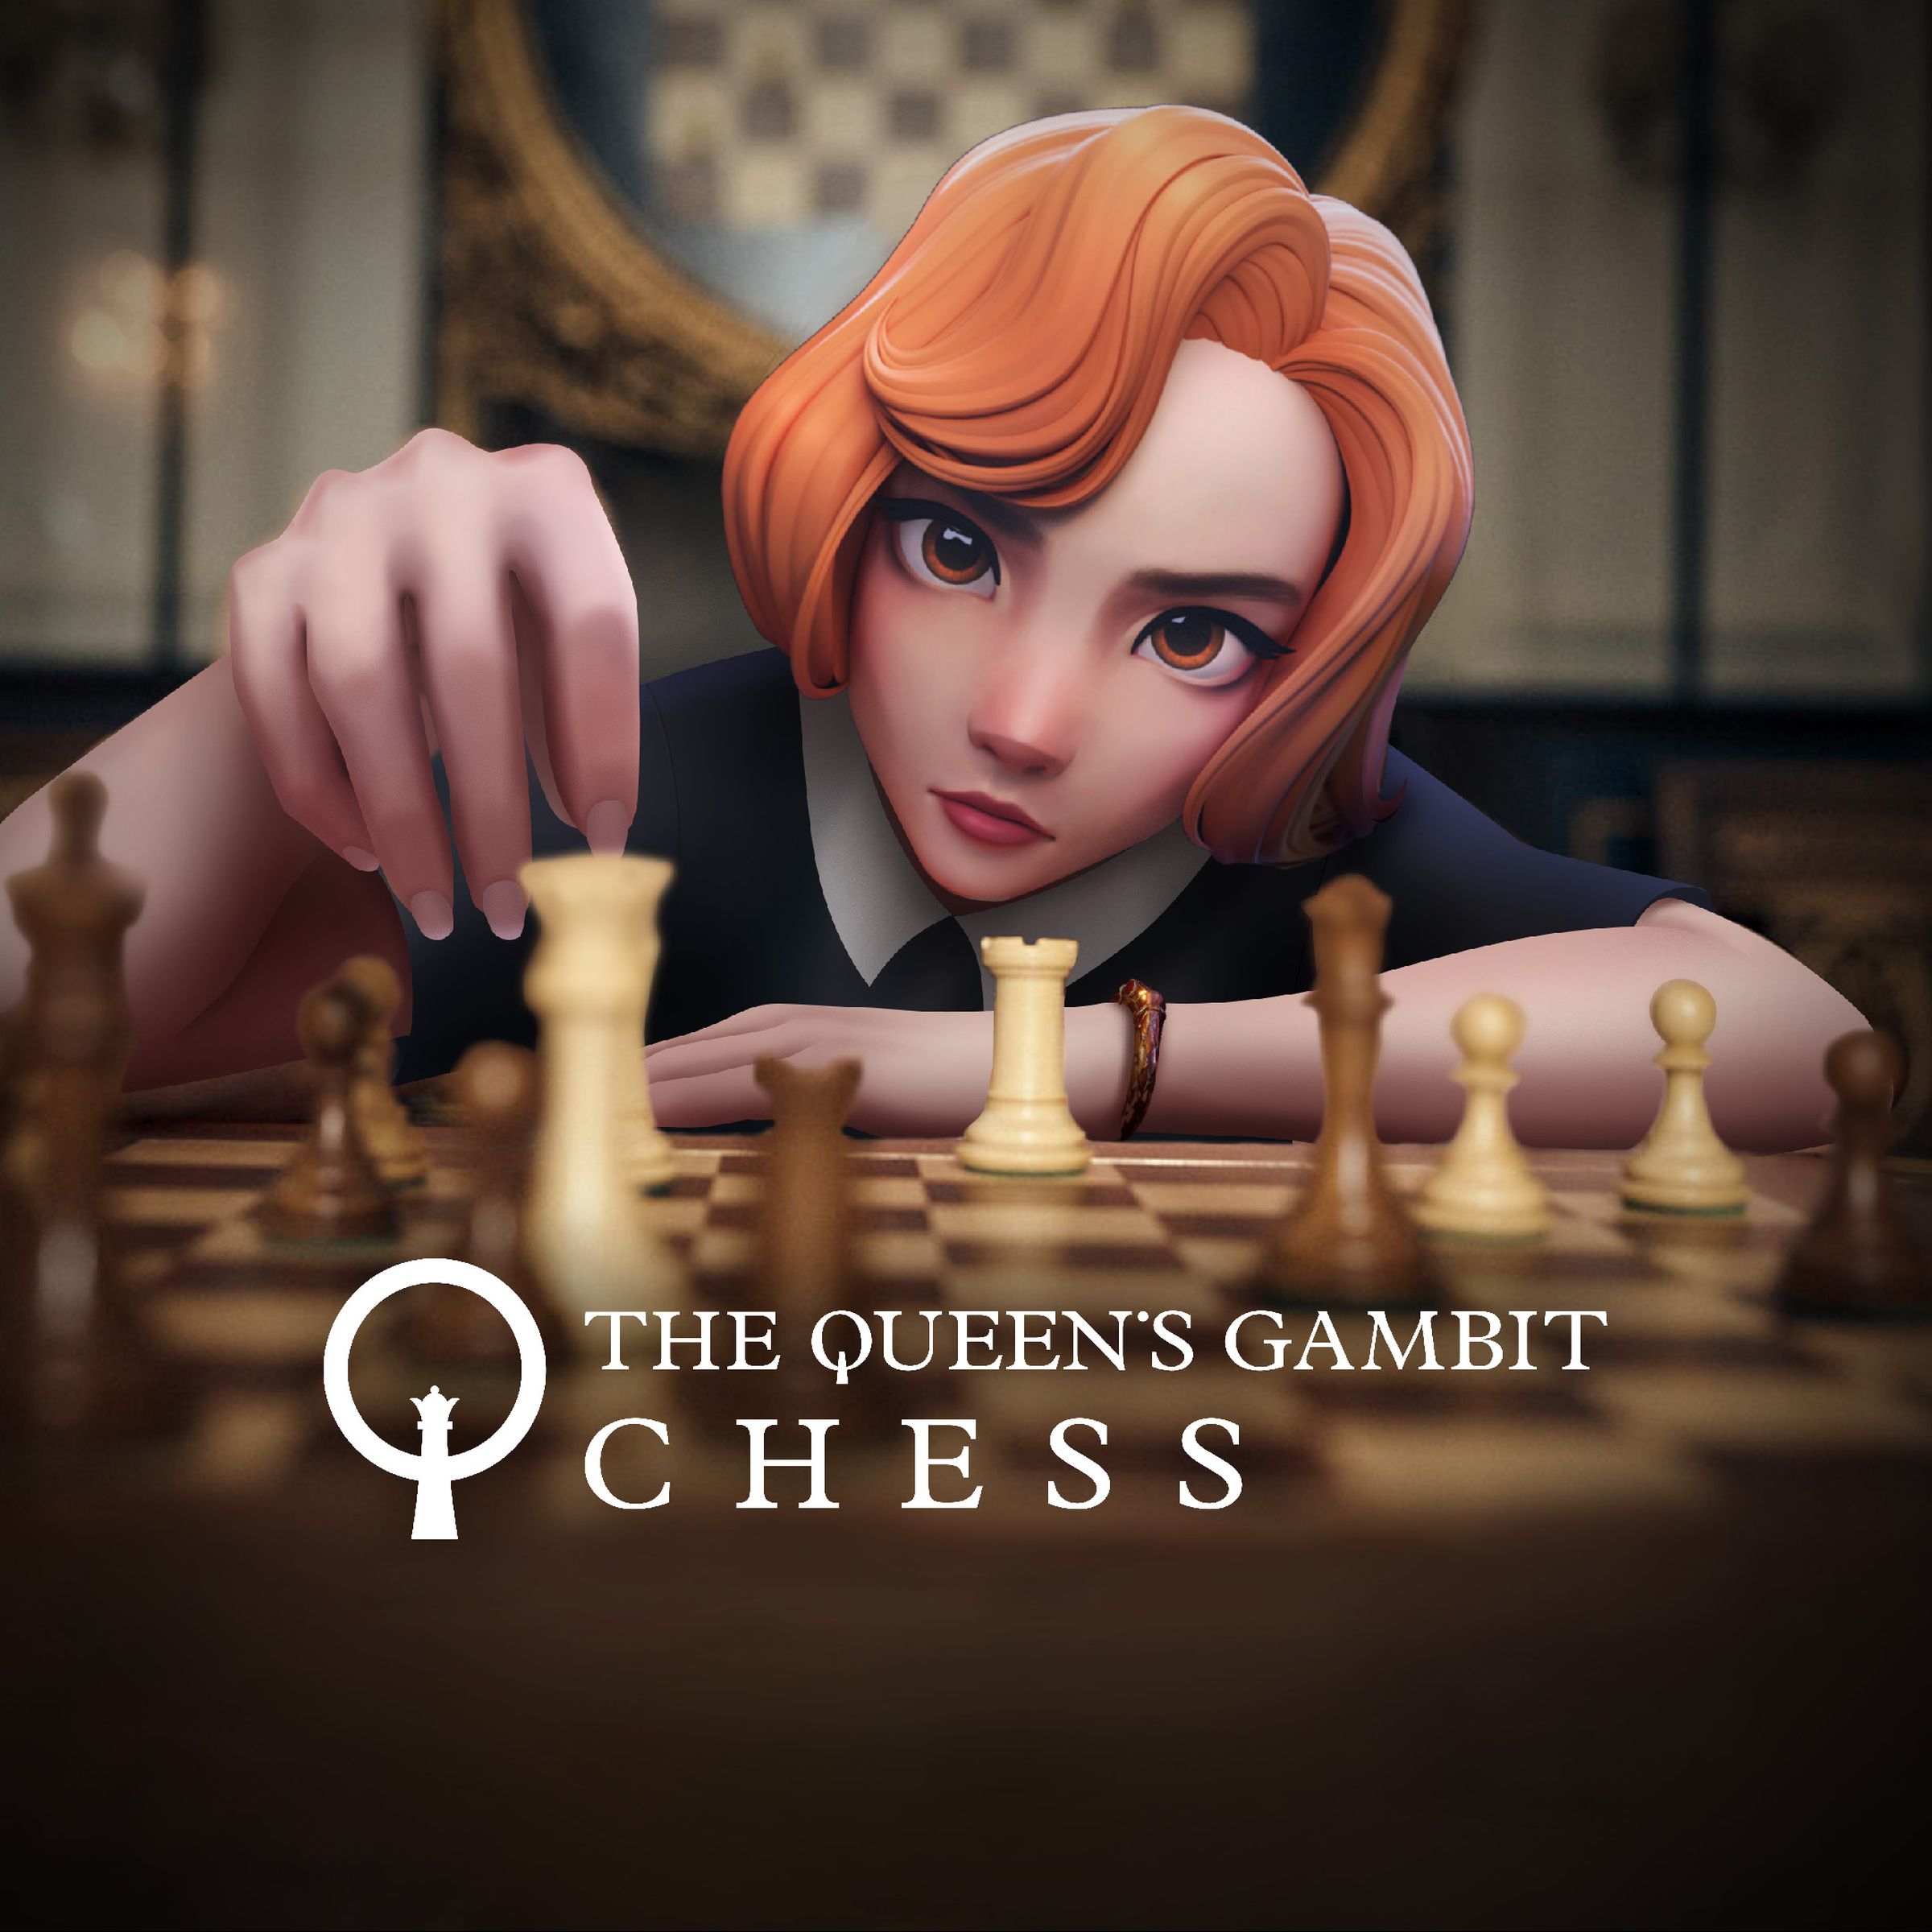 Promotional art for the Netflix video game The Queen’s Gambit Chess.